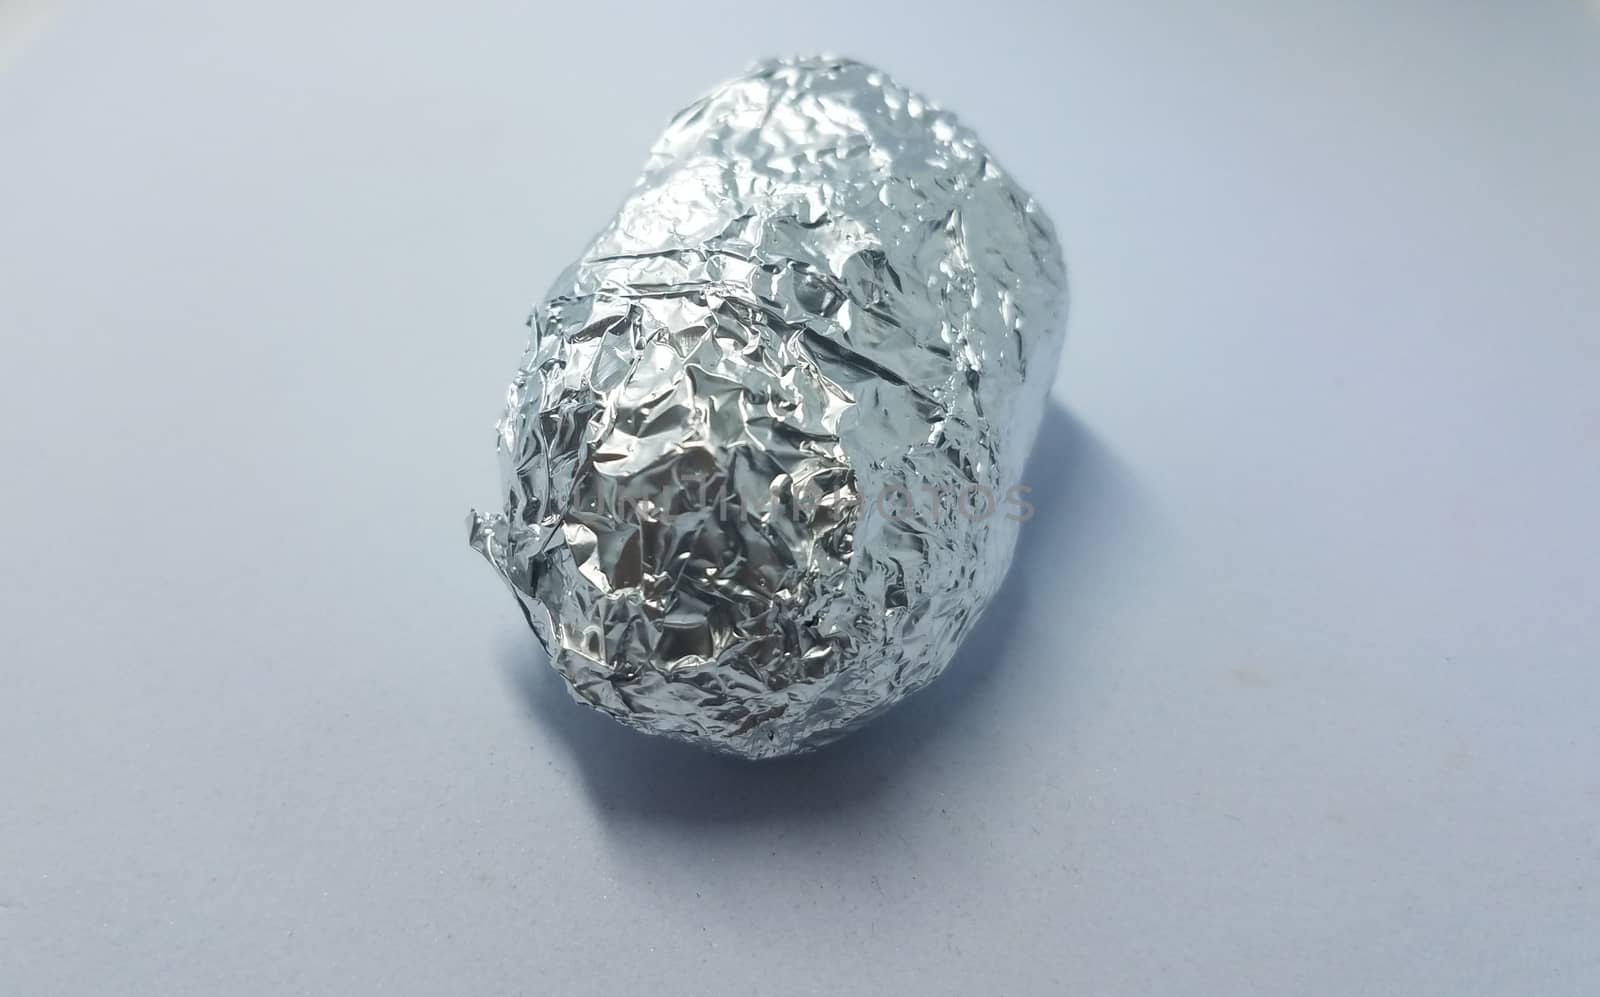 object wrapped in foil on white background by stockphotofan1